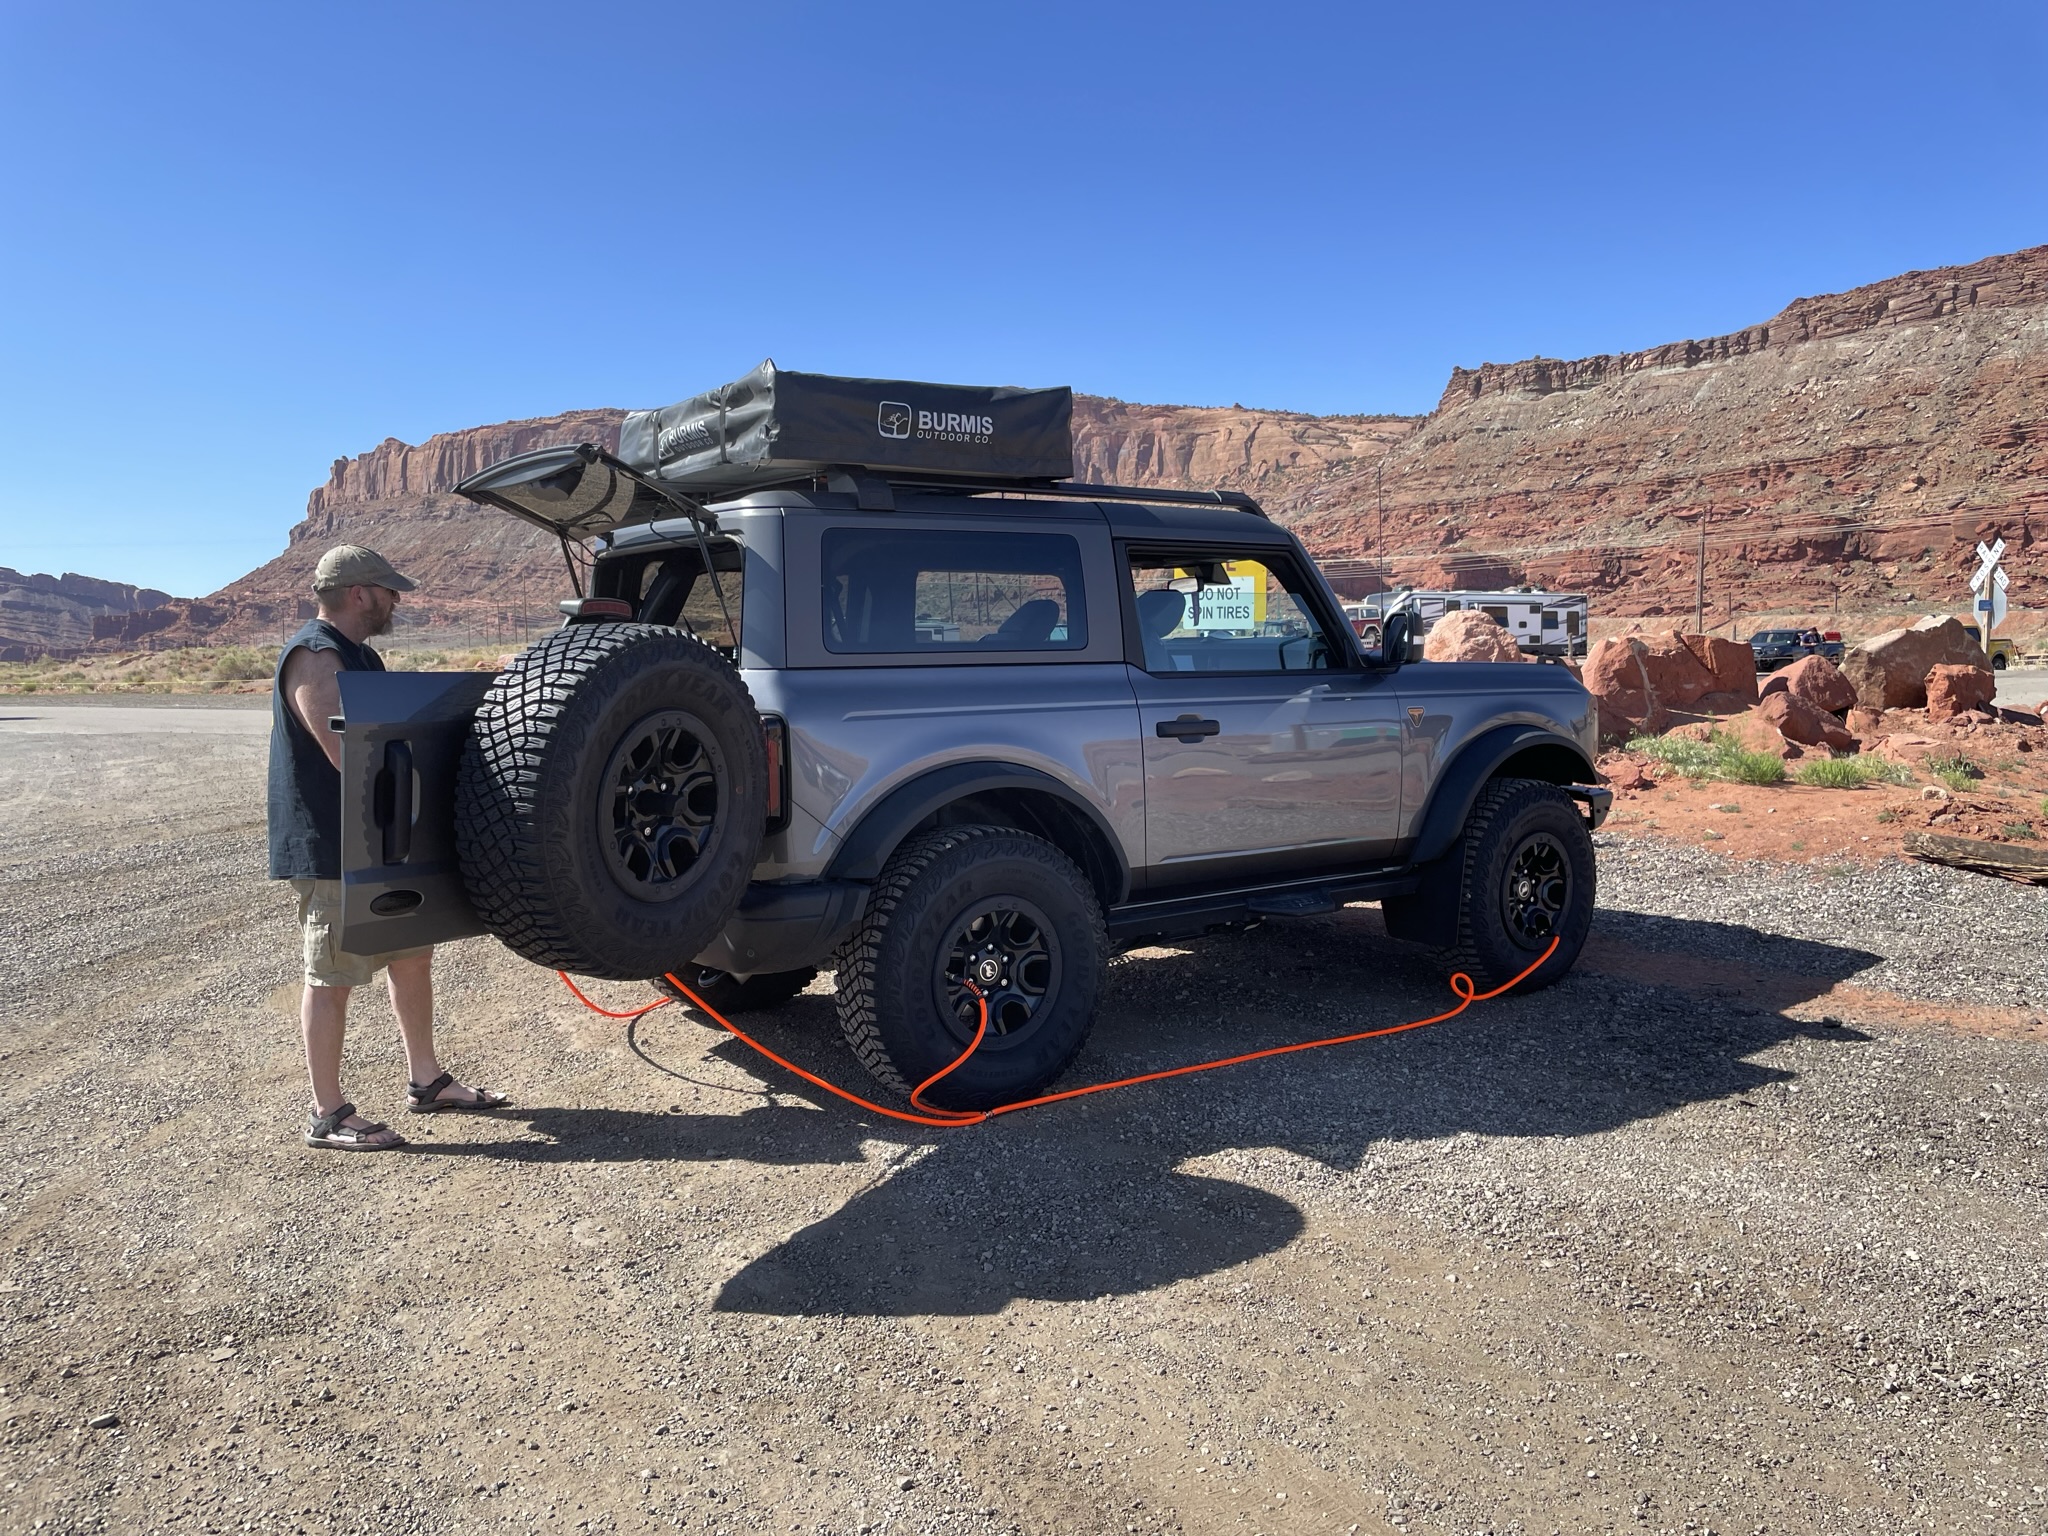 Ford Bronco Let's see your roof-top Tents and camping setups! D50C1FA8-DFF9-4F5C-910F-CCD4353F2563